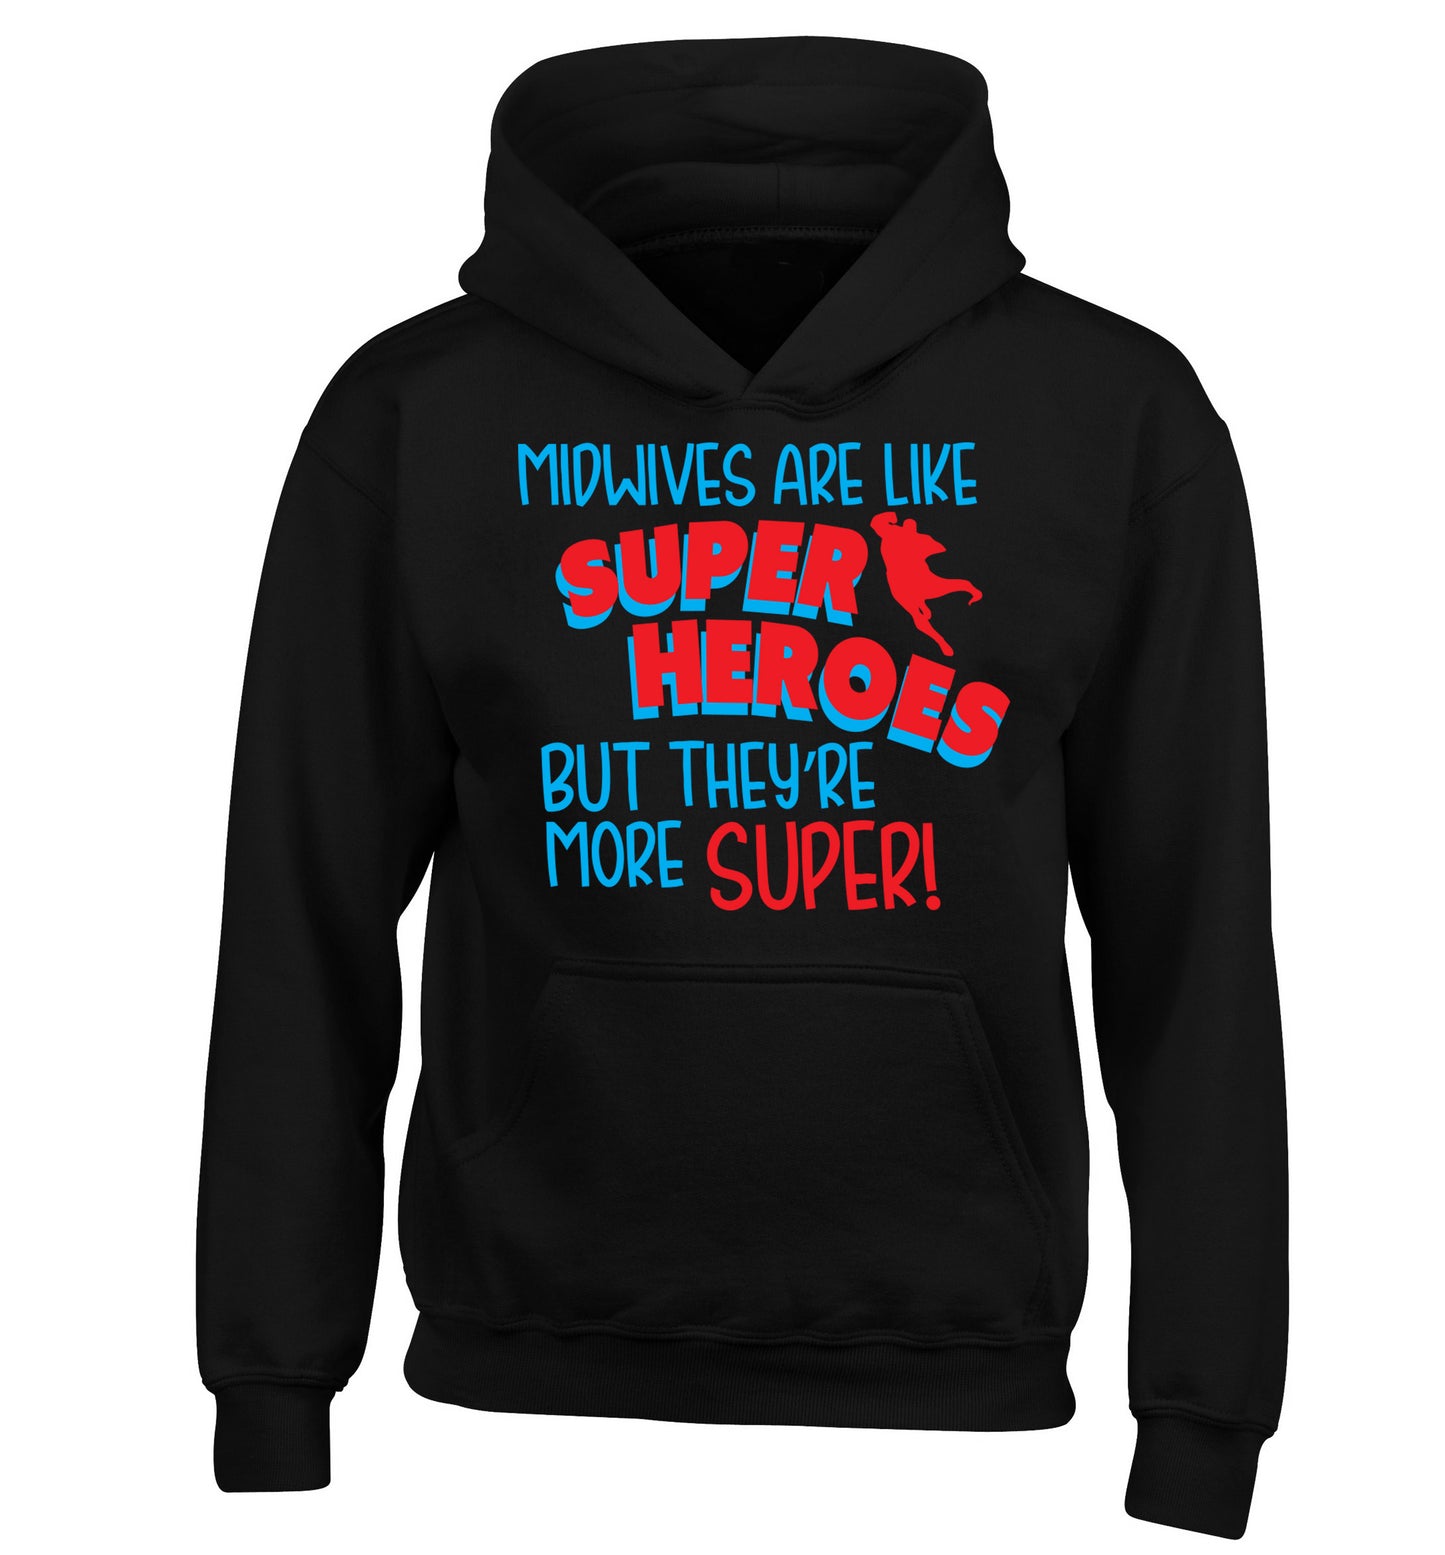 Midwives are like superheros but they're more super children's black hoodie 12-13 Years